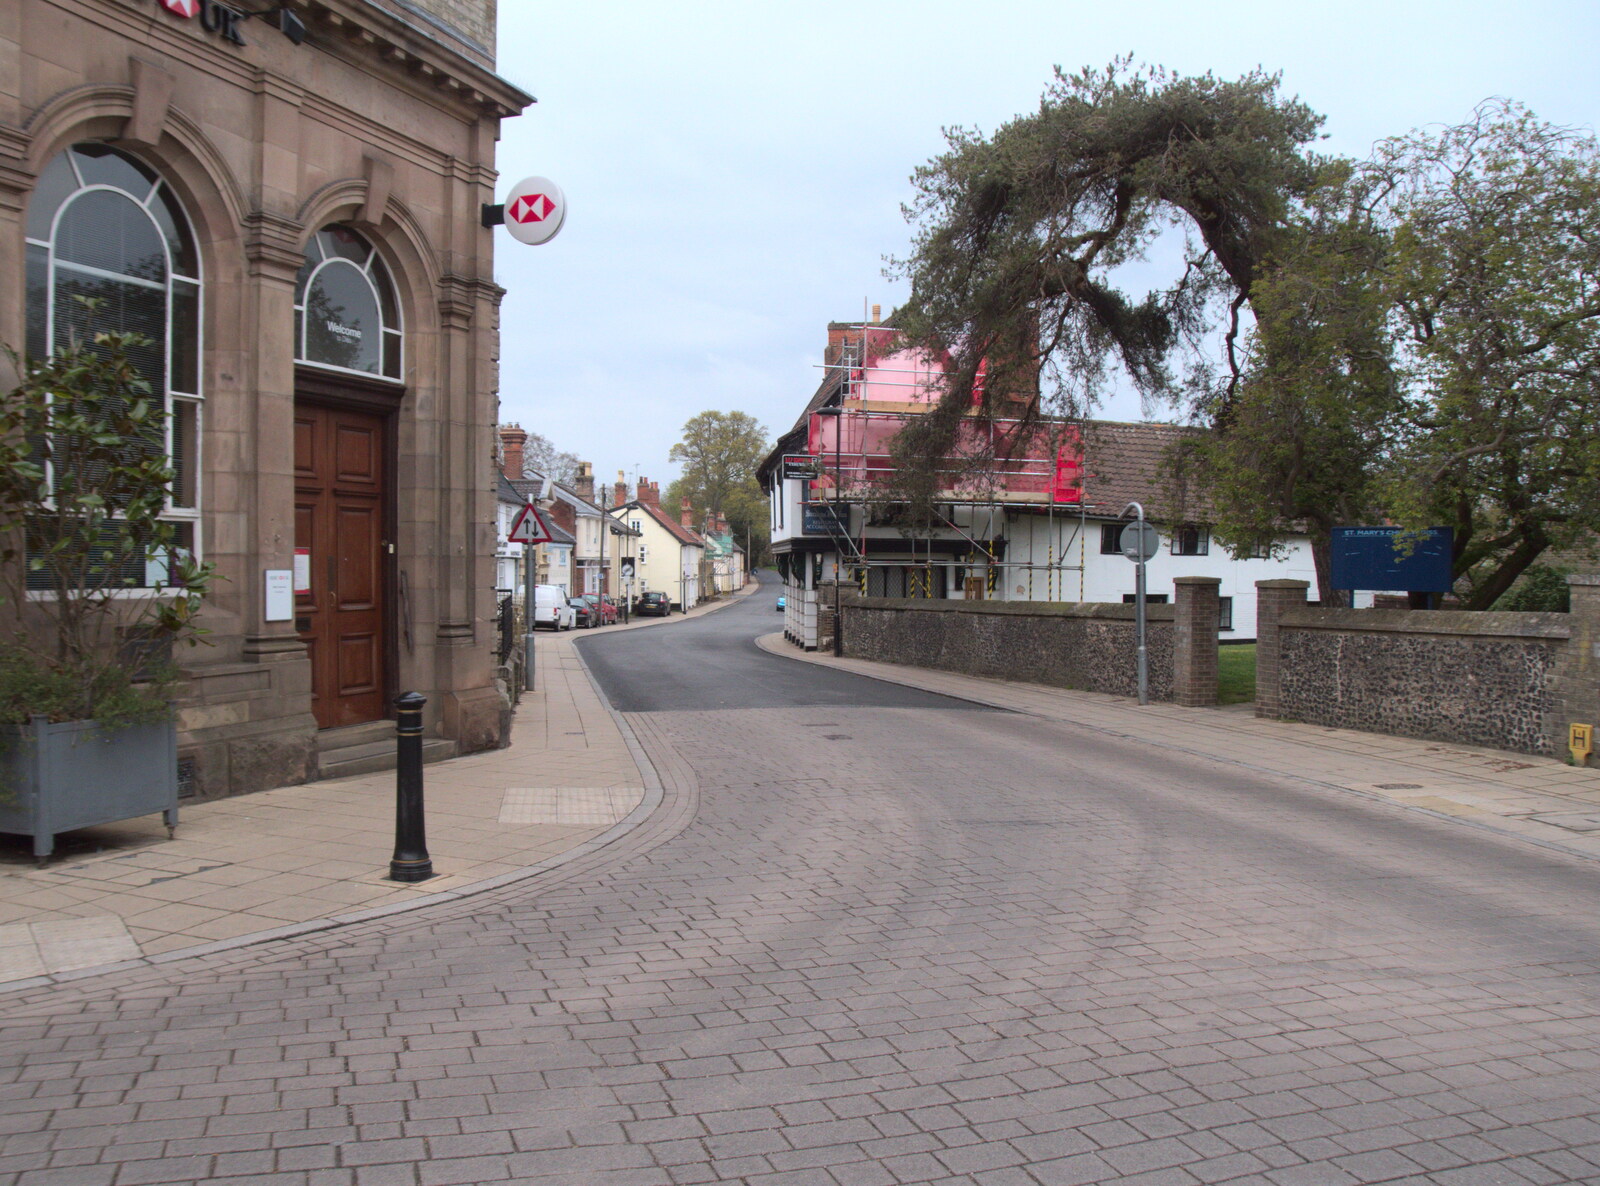 Mount Street is also empty from The Lockdown Desertion of Diss, and a Bike Ride up the Avenue, Brome - 19th April 2020